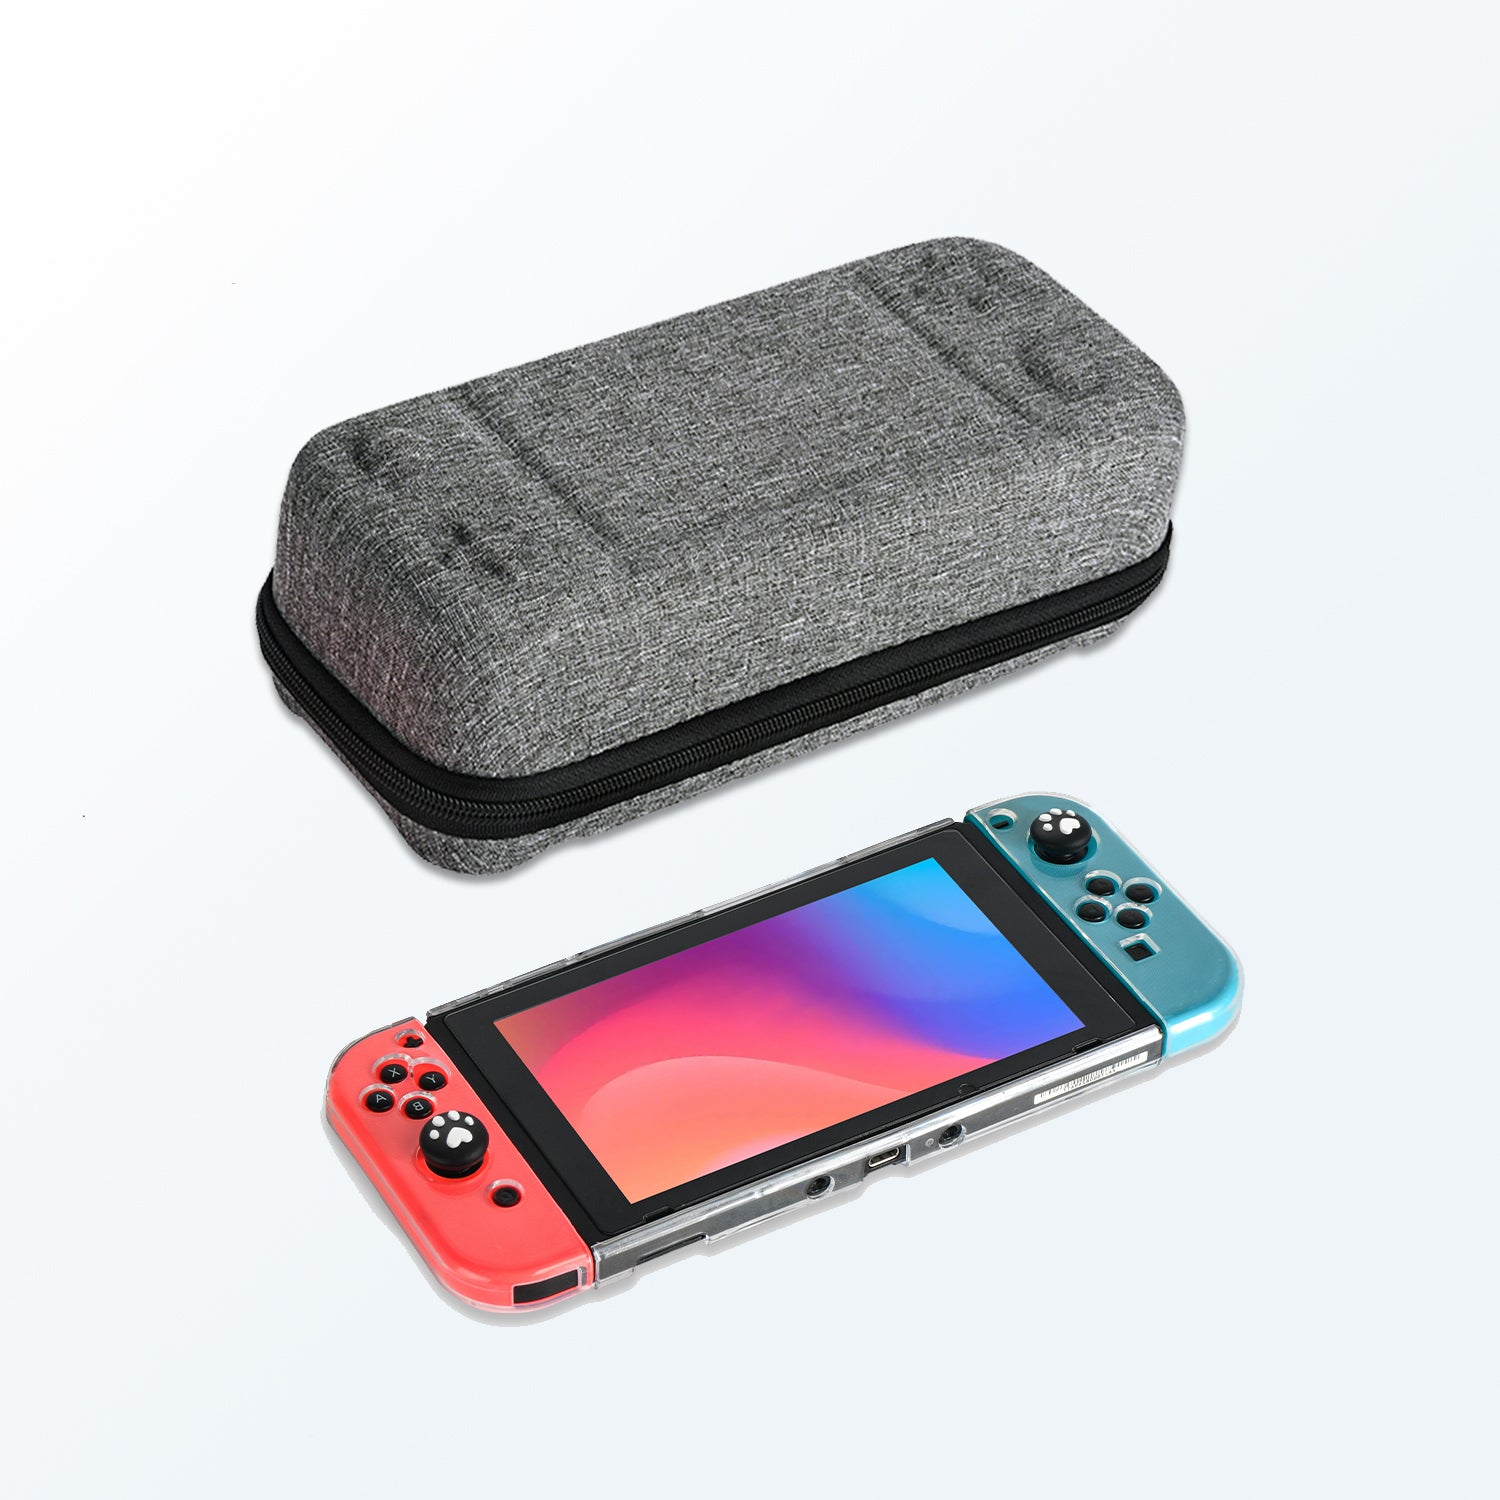 Younik Large Capacity Switch Bundle, Carrying Case for Switch, Switch Protective Case